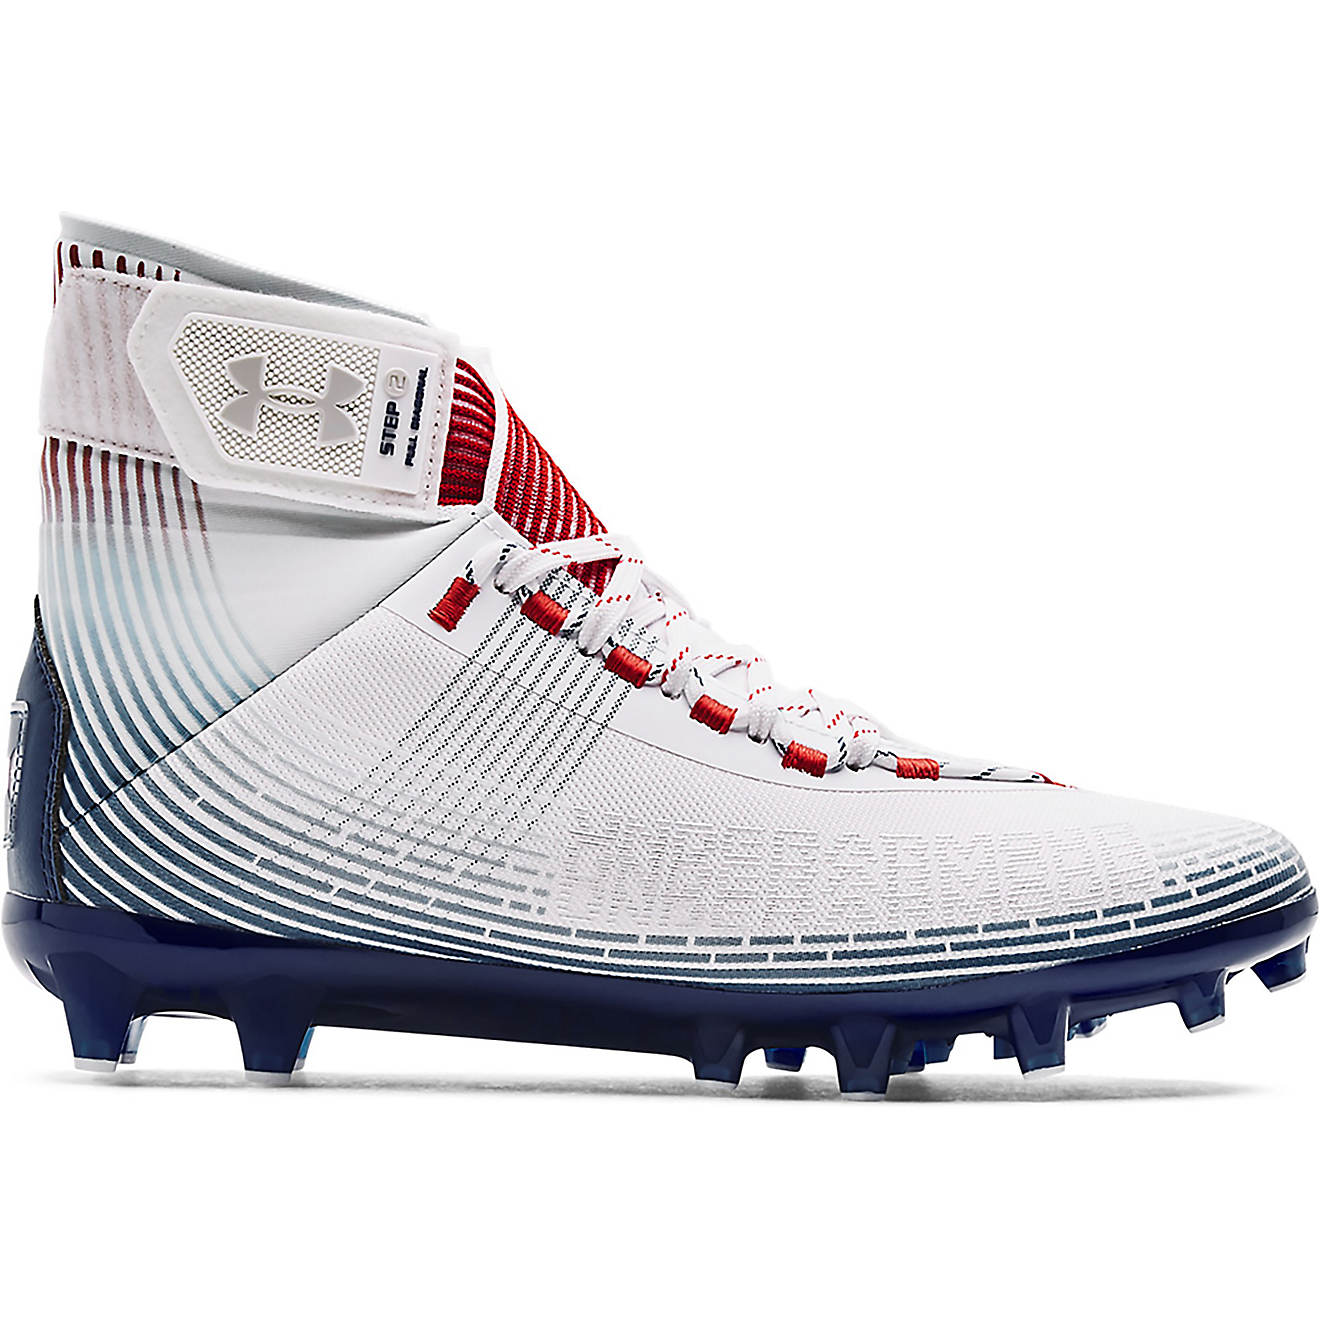 Under Armour Mens Highlight MC Football Cleats TEXAS Limited Edition Red/Blue 